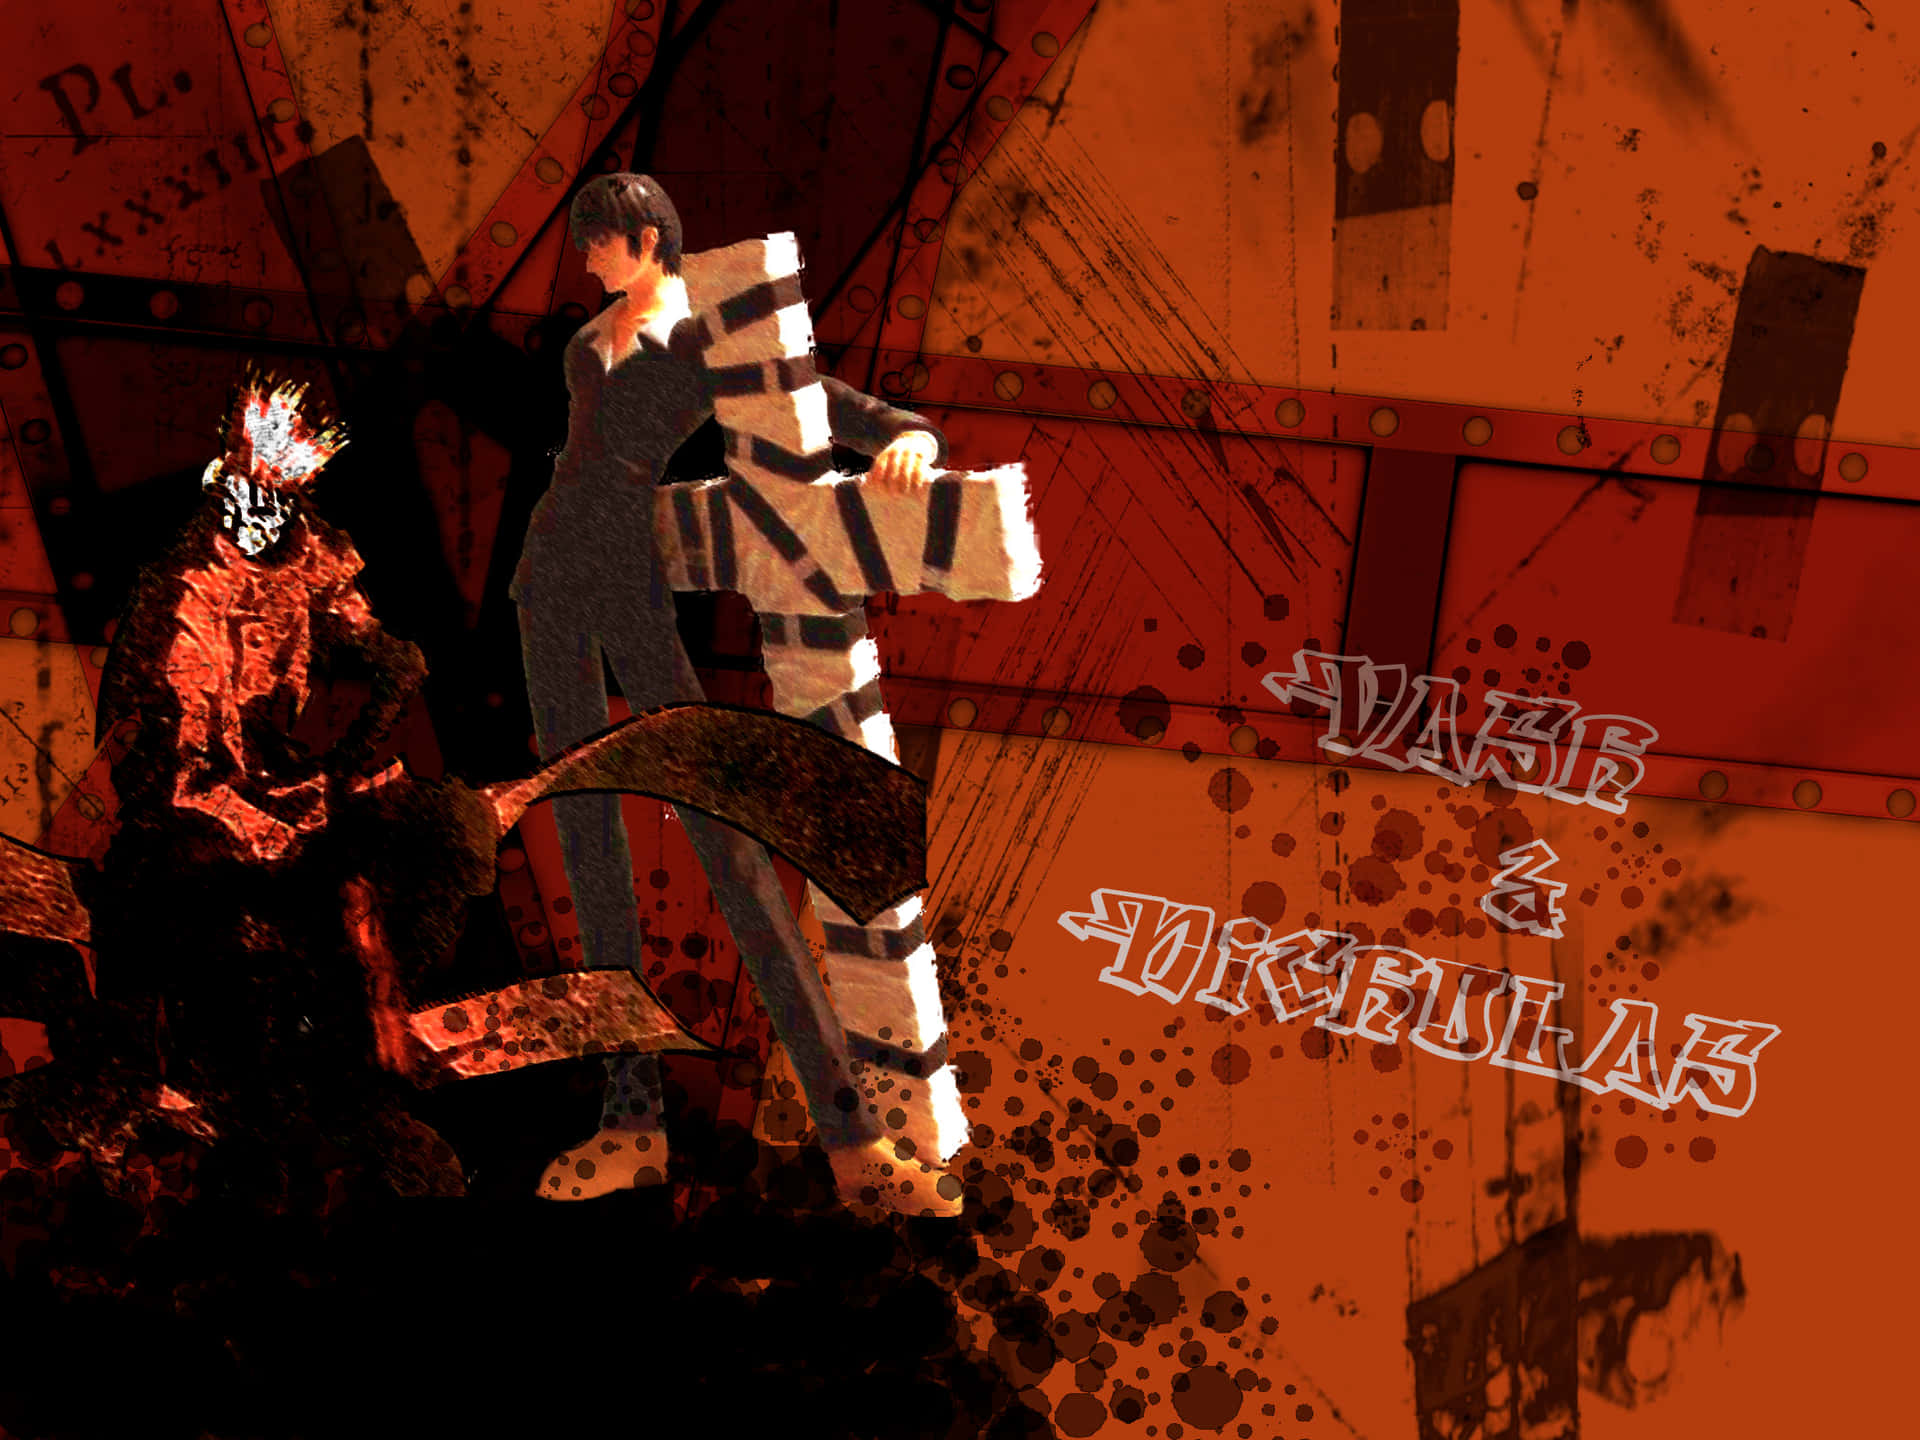 Nicholas D Wolfwood with his Cross Punisher in a dramatic pose Wallpaper